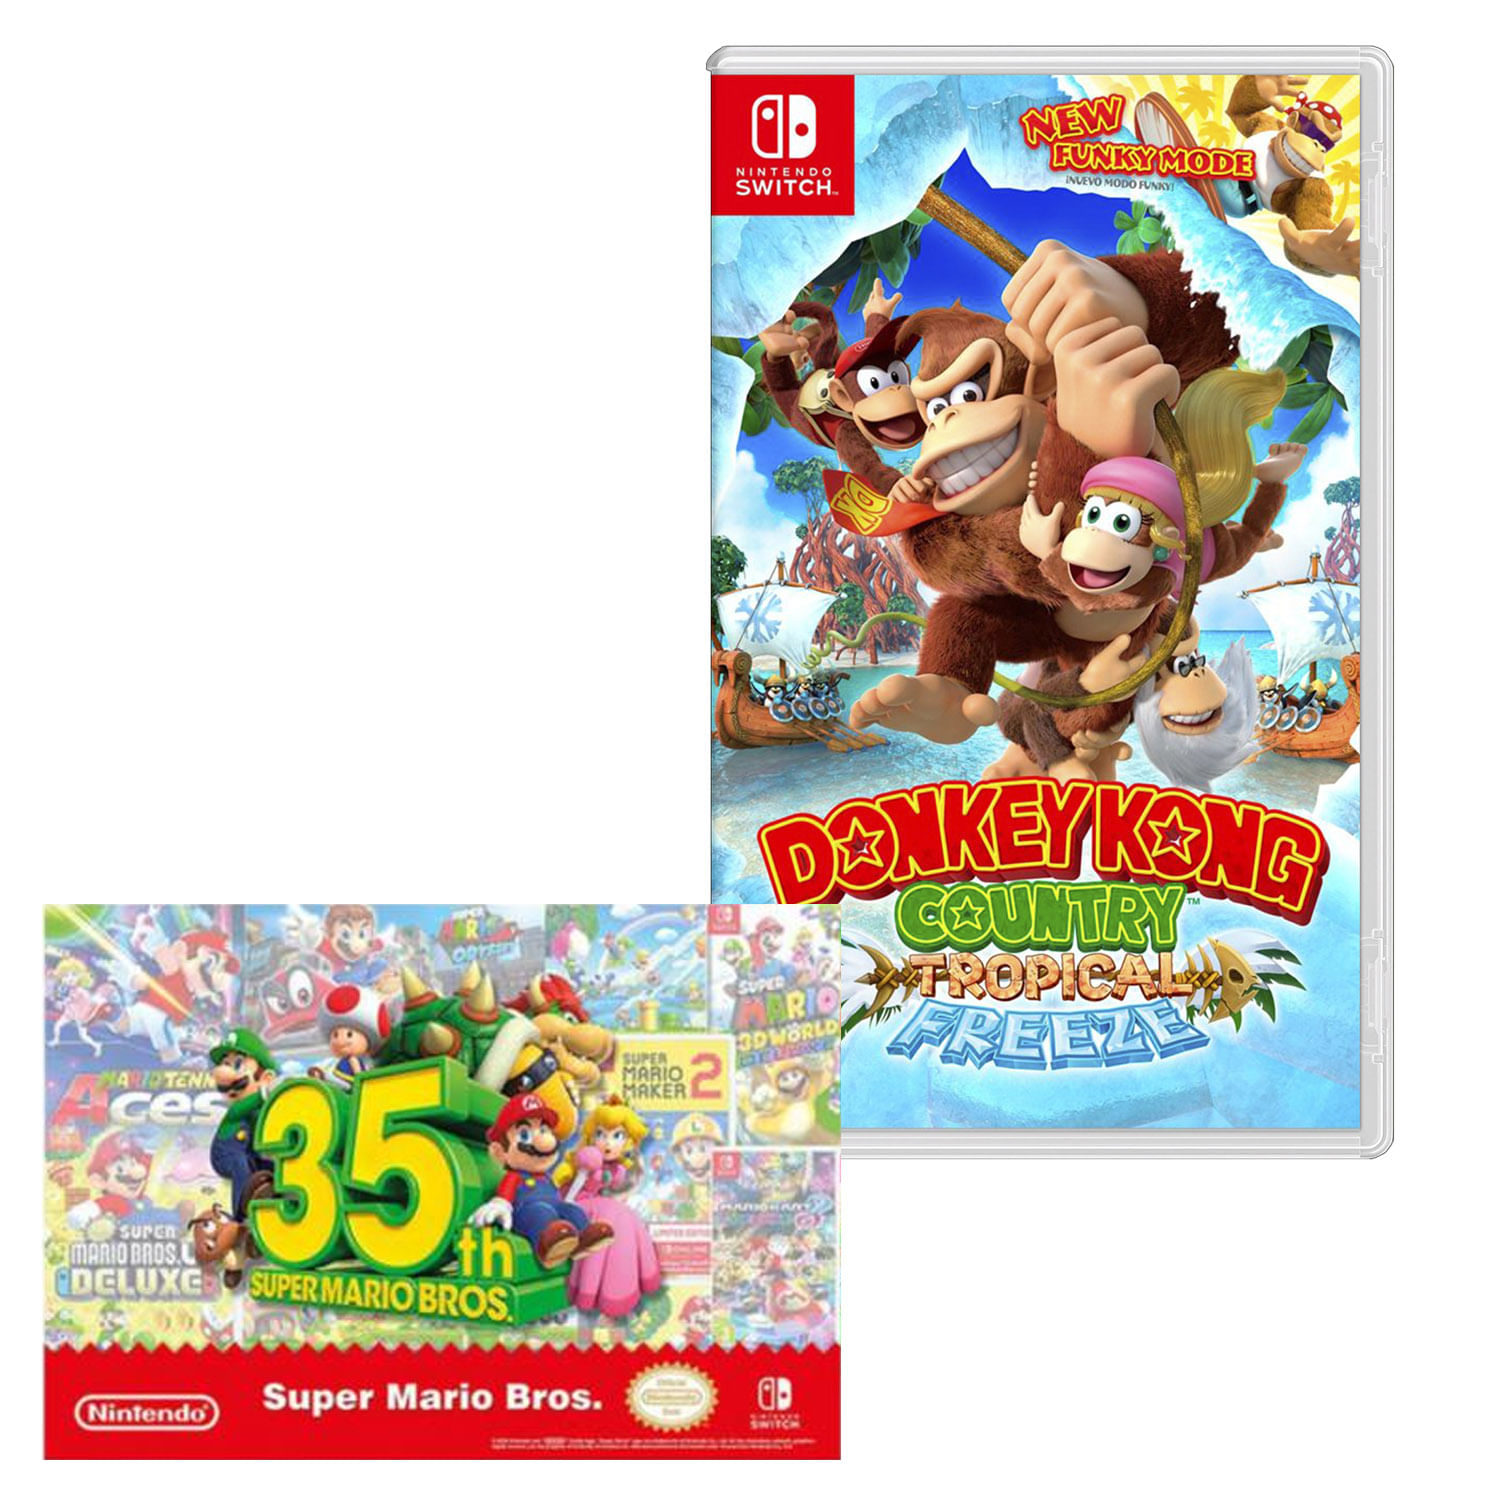 Donkey kong country tropical freeze nintendo switch + poster